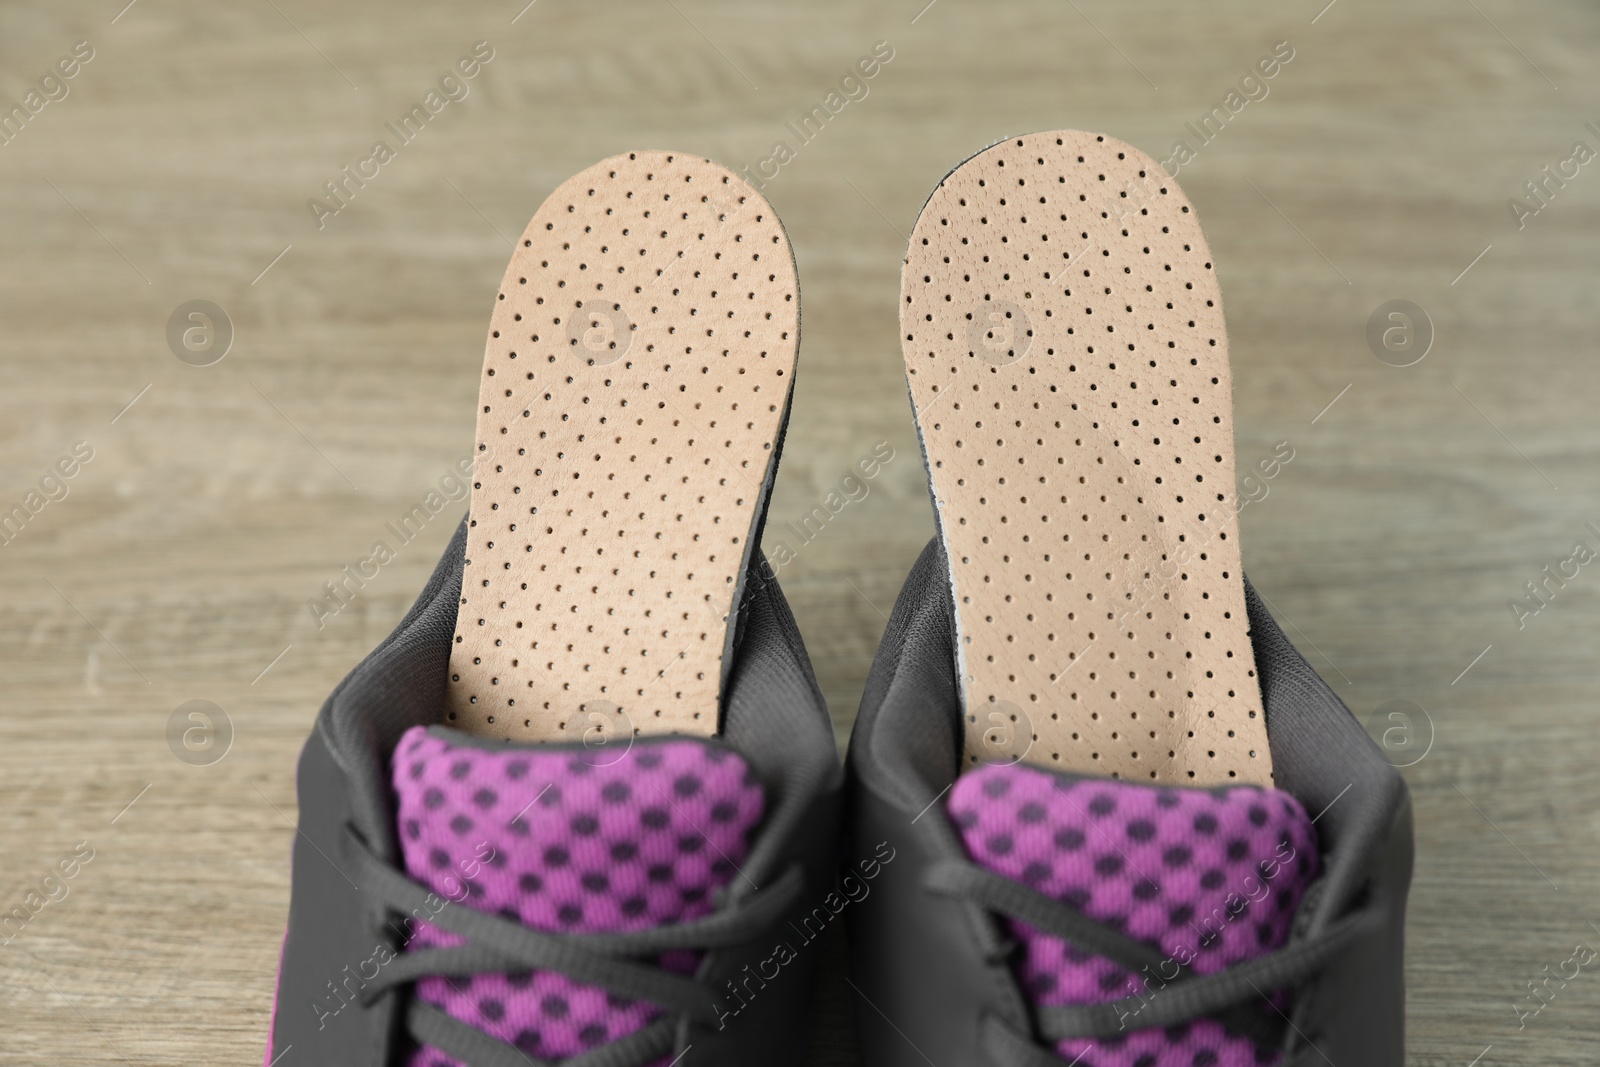 Photo of Orthopedic insoles in shoes on floor, closeup